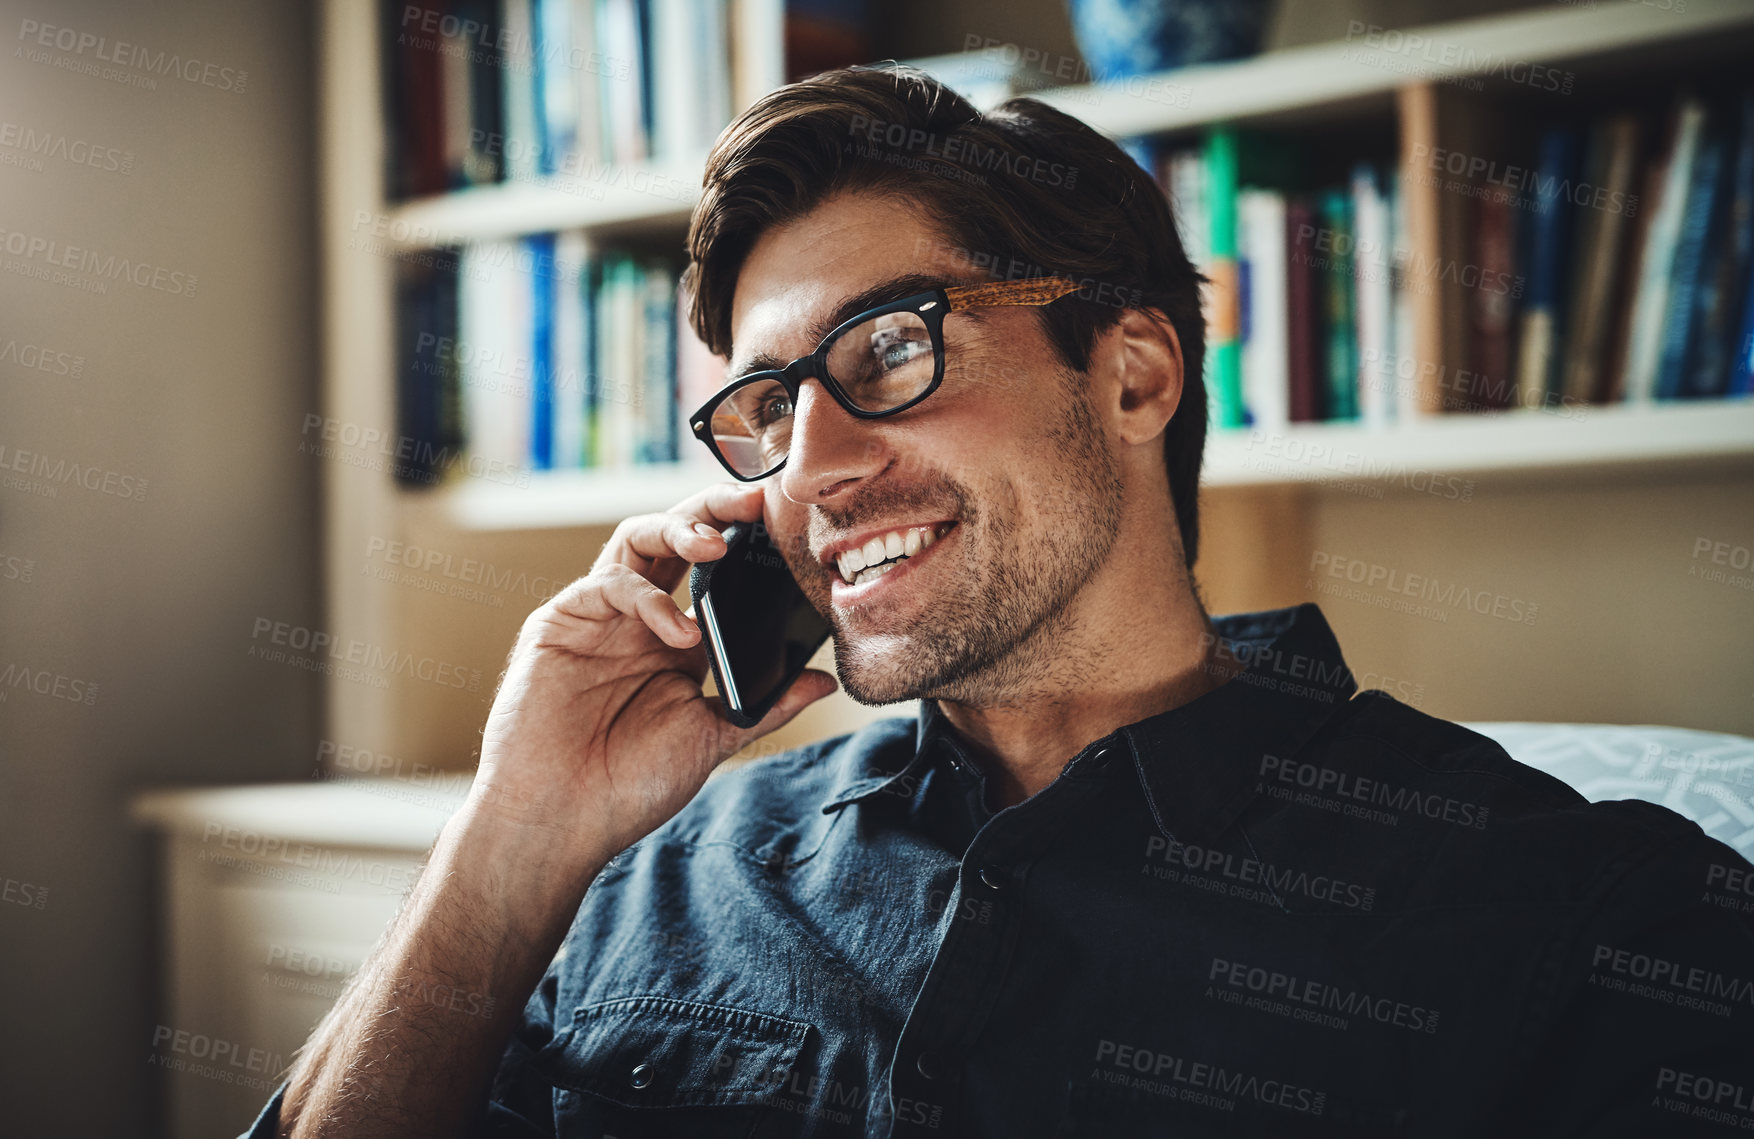 Buy stock photo Shot of a handsome young businessman making a phone call in his office at home